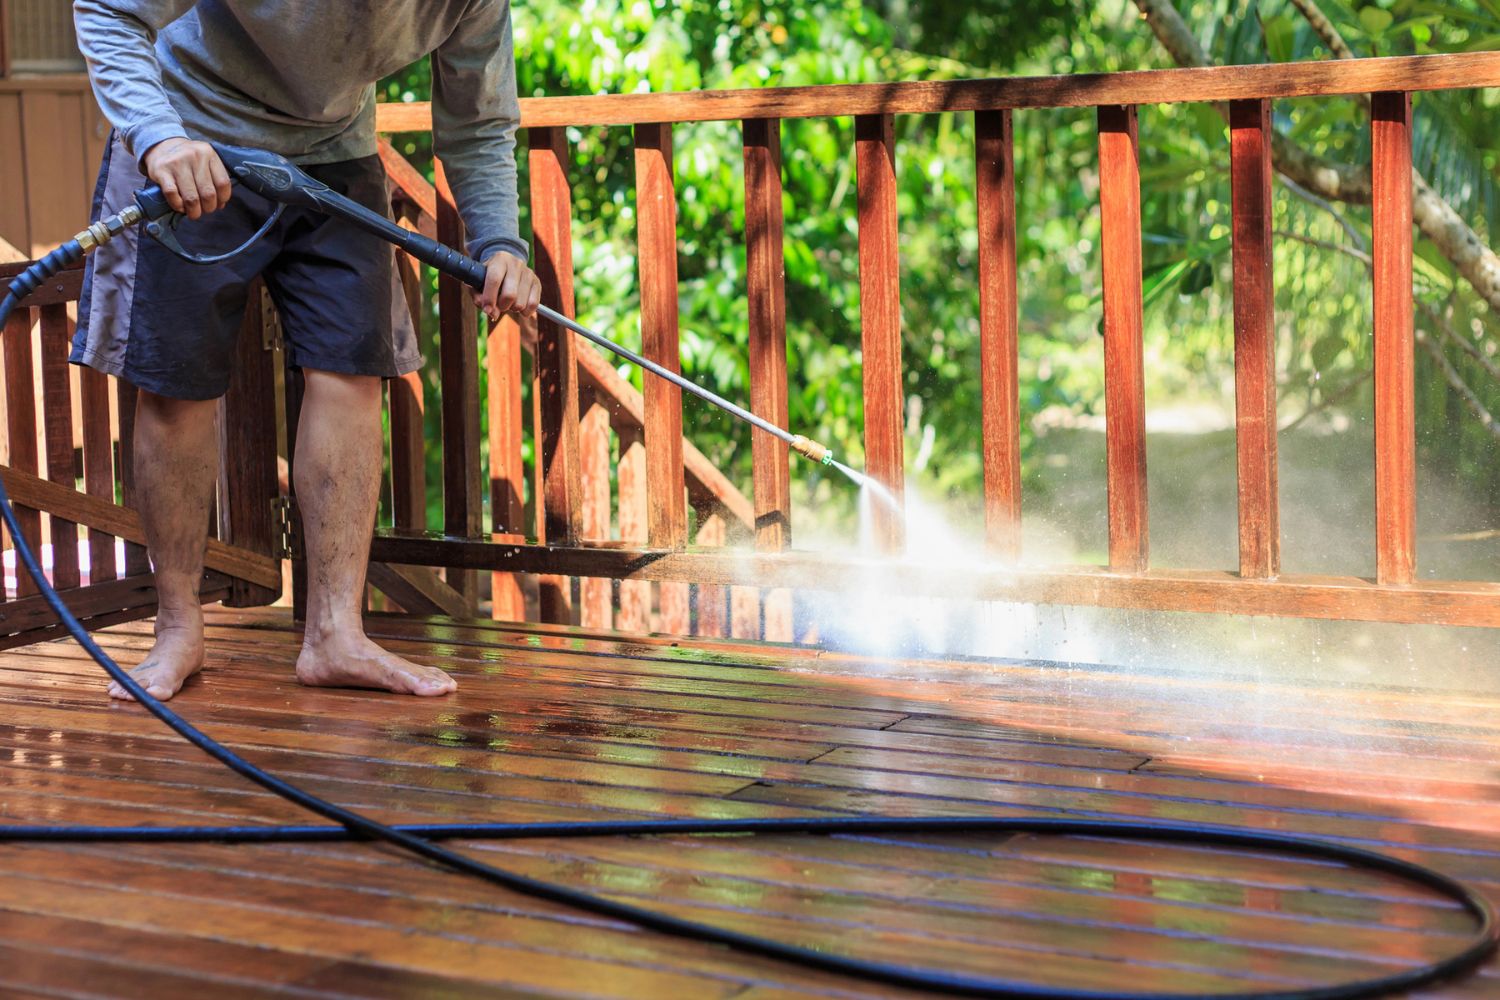 A close up of a person pressure washing a deck on a sunny day.